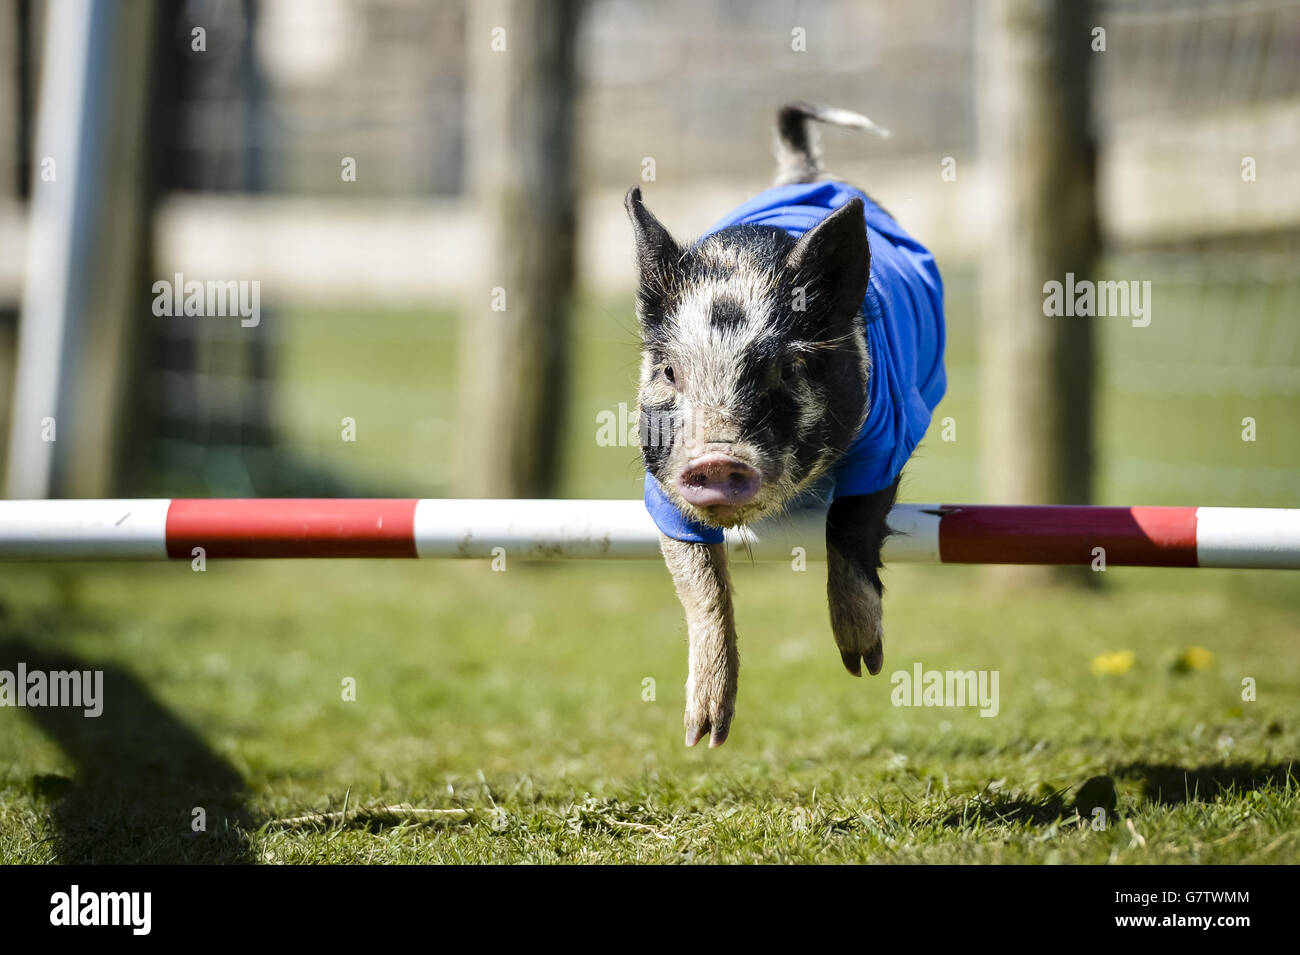 Conservative Party pig David Hameron jumps a fence on his lap of honour after romping home to win the 2015 Pennywell Bacon Stakes Steeplechase special General Election pig race, defeating rivals Ed Swiliband for the Labour Party, Pork Clegg for the Liberal Democrats, Nigel Forage for Ukip and Pork Scratchings representing all other political parties. Stock Photo